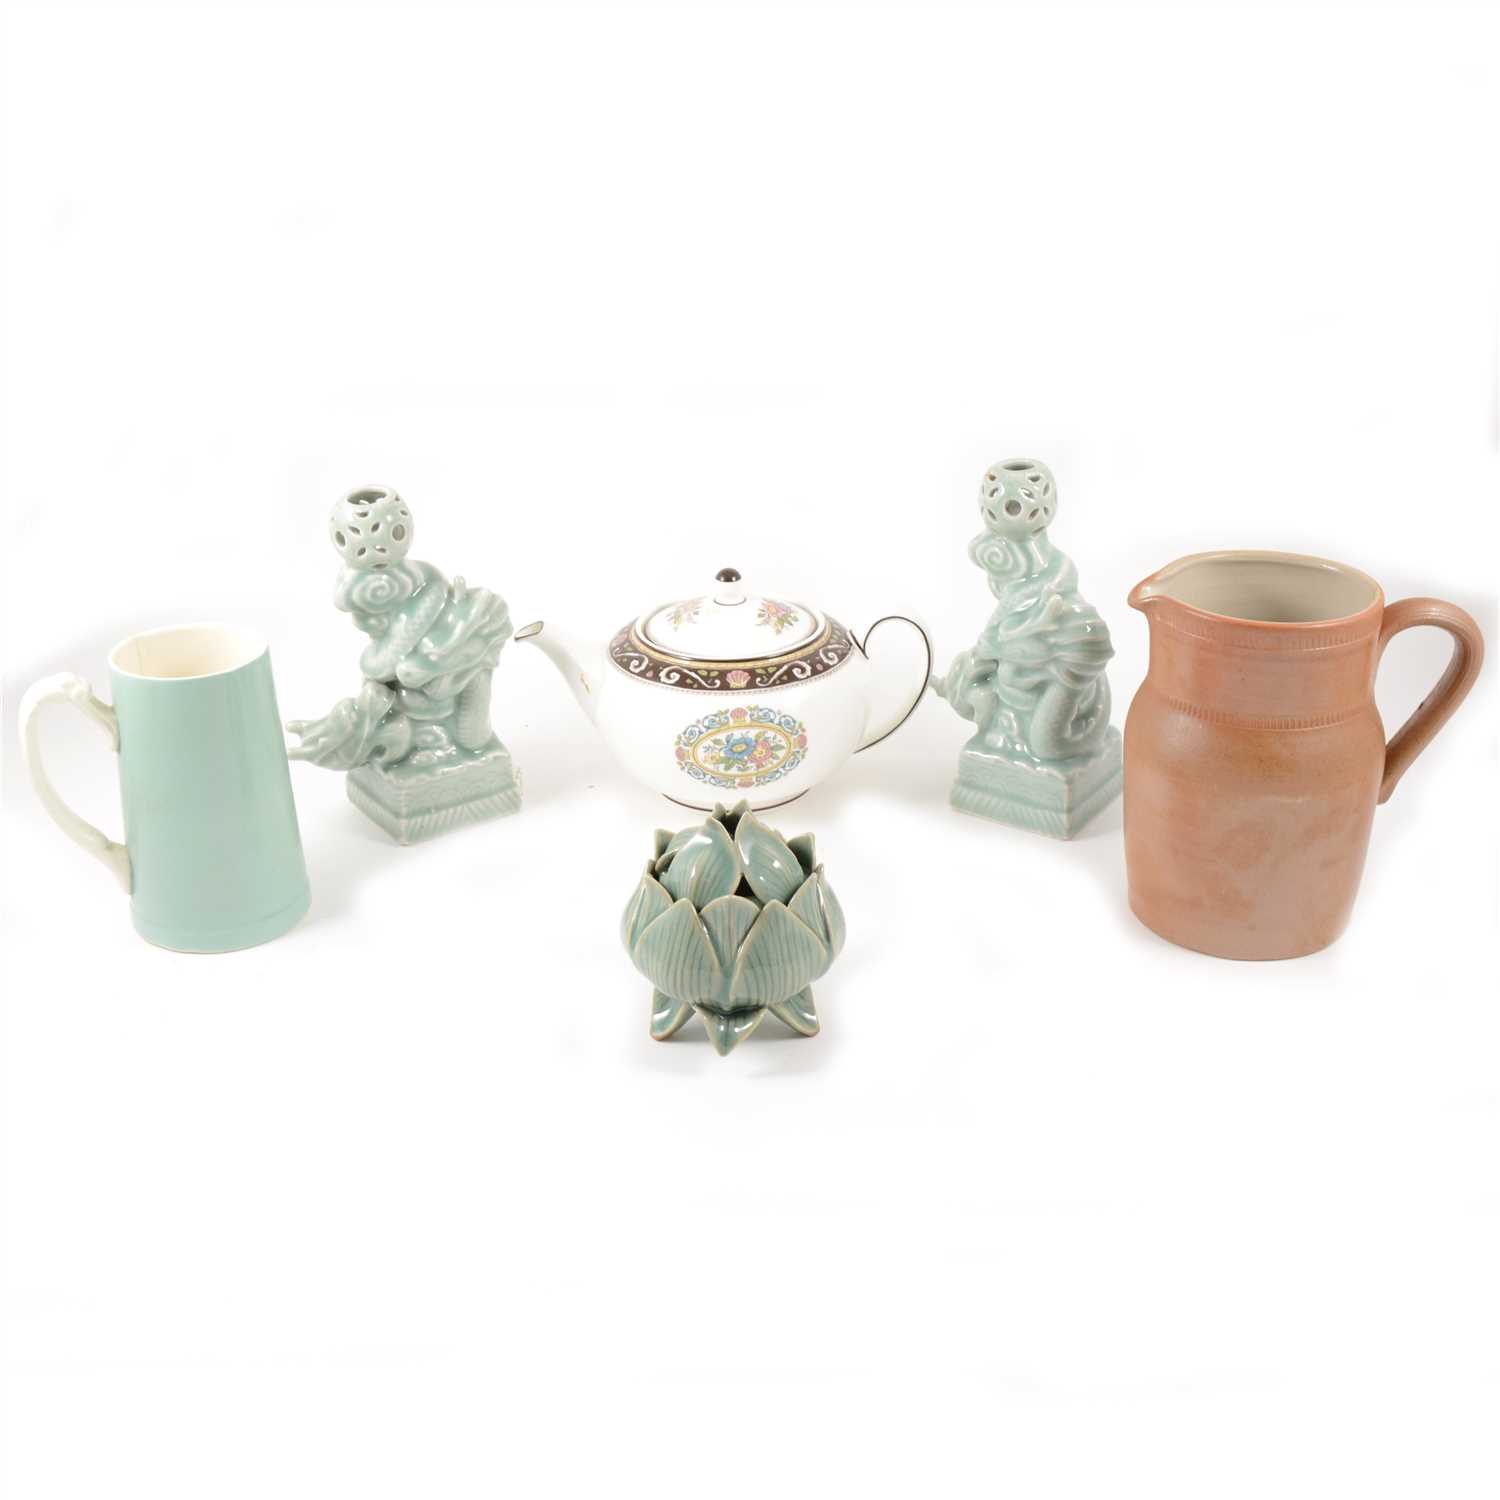 Lot 10 - A Royal Worcester Evesham Ware biscuit jar, six Waterford crystal glasses, and other assorted ceramics.